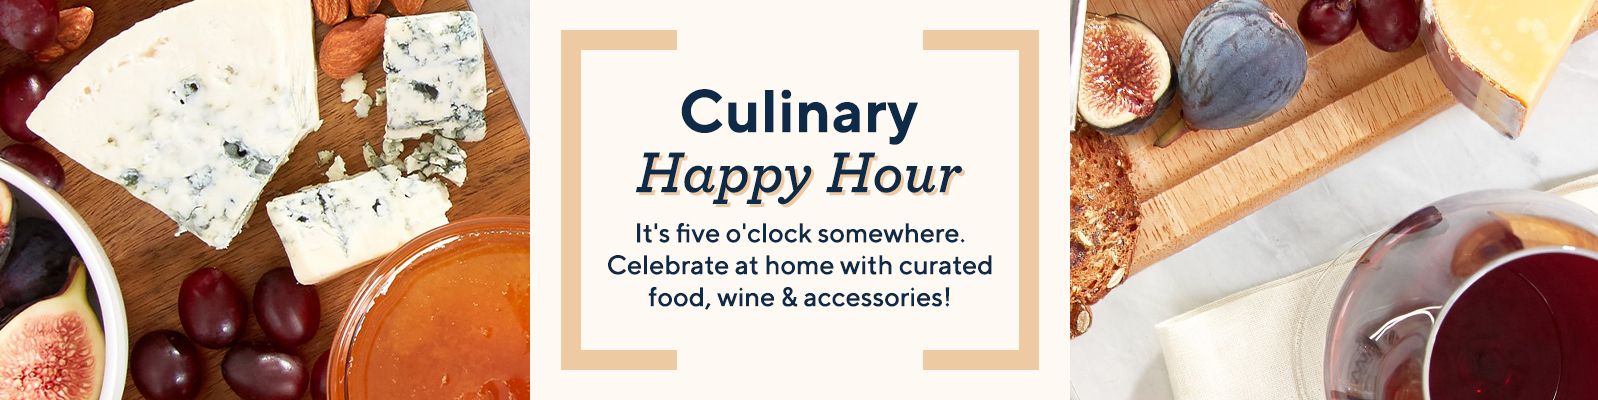 Culinary Happy Hour It's five o'clock somewhere. Celebrate at home with curated food, wine & accessories!